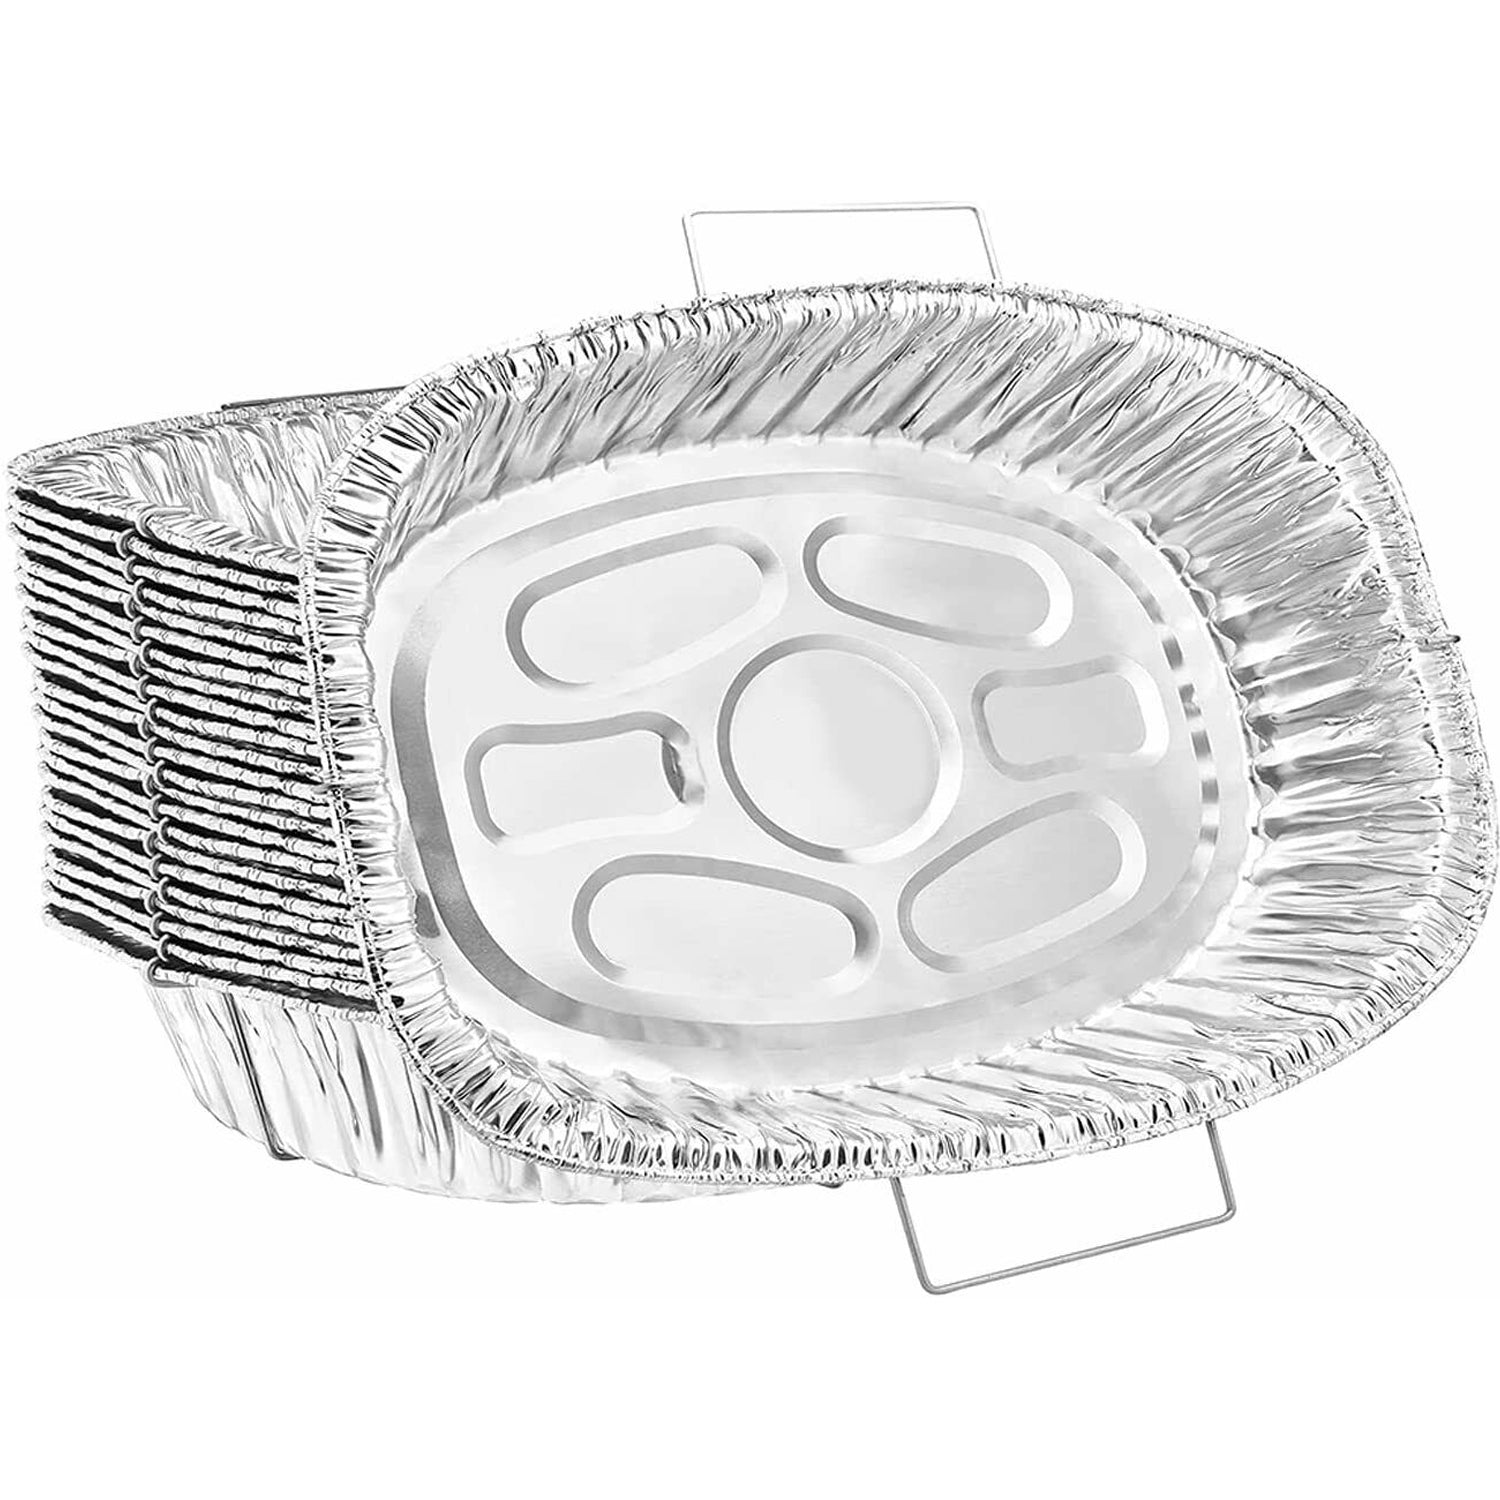 Heavy Duty Oval Aluminum Foil Trays Turkey Roasting Container For